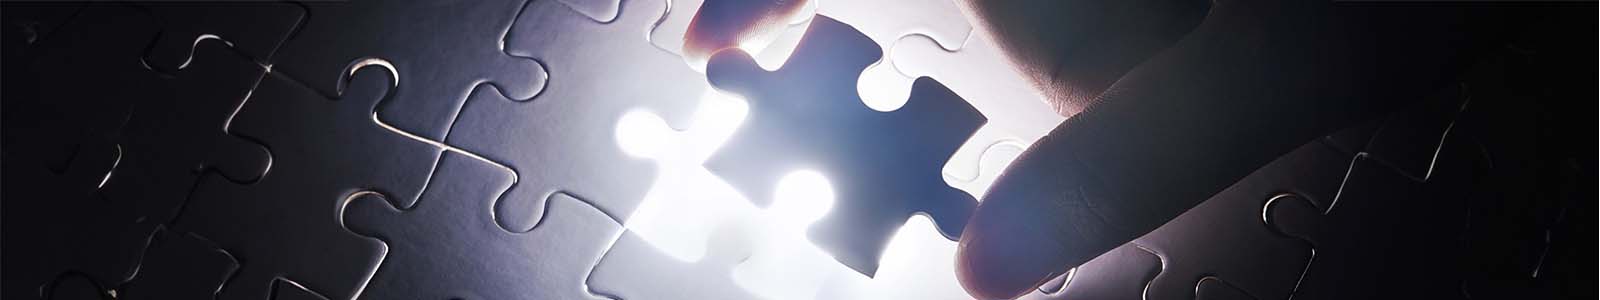 A Digital Document Management System as the final piece of the filing puzzle